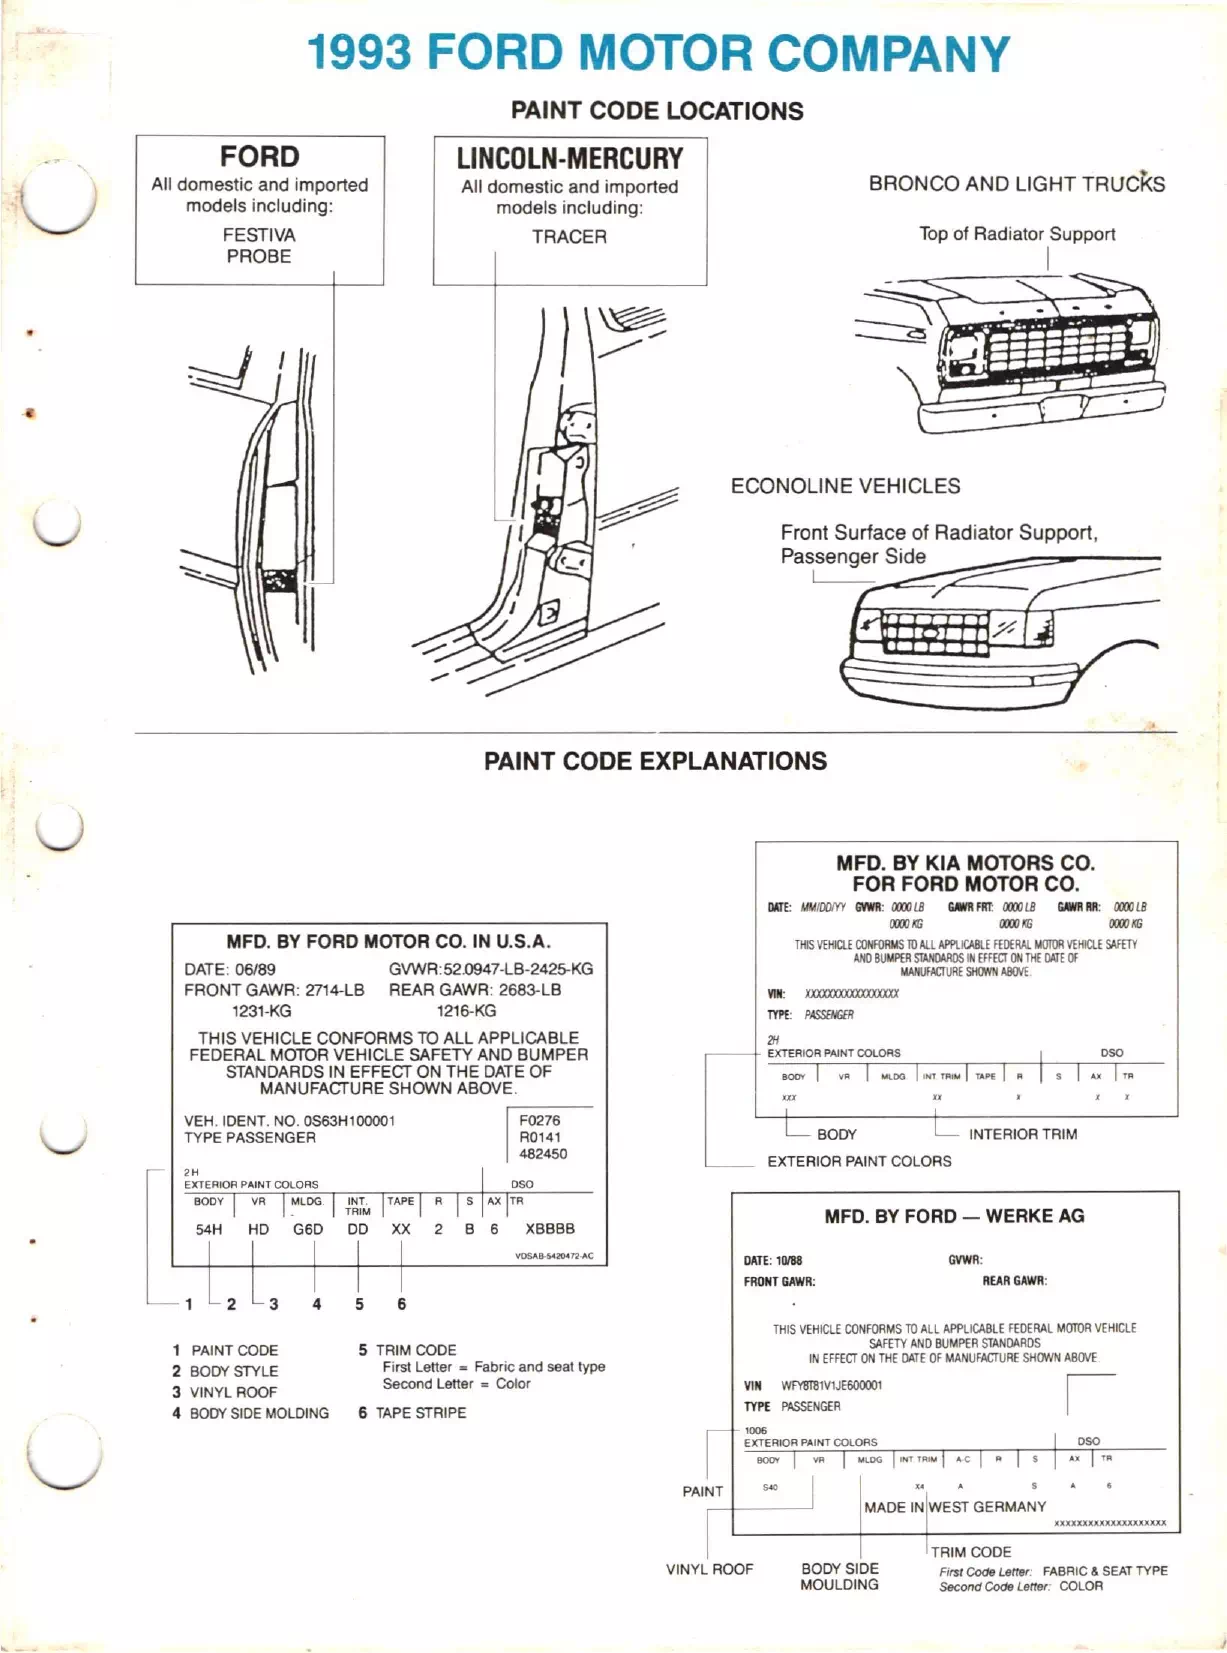 shows you how to look up your paint code on the factory sticker for 1993 ford lincoln and mercury  vehicles